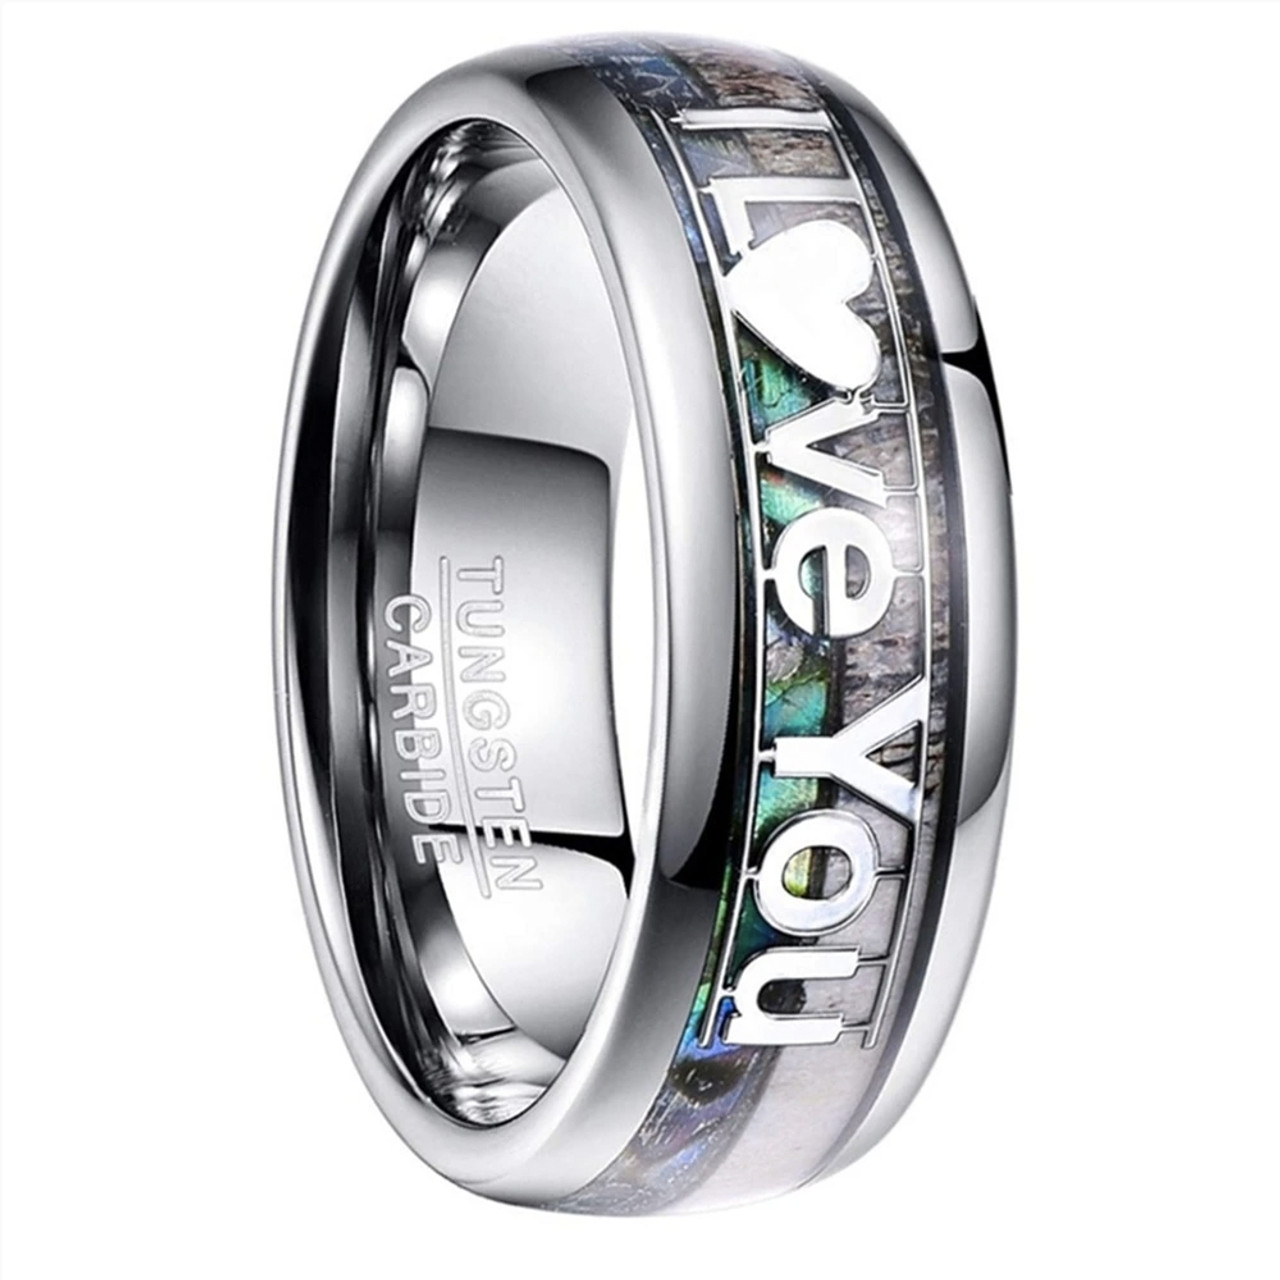 (8mm)  Unisex, Men's or Women's Tungsten Carbide Wedding ring bands. "I Love You" Ring - Silver Multi Color Rainbow Abalone Shell and wood Inlay Ring (Organic colors)